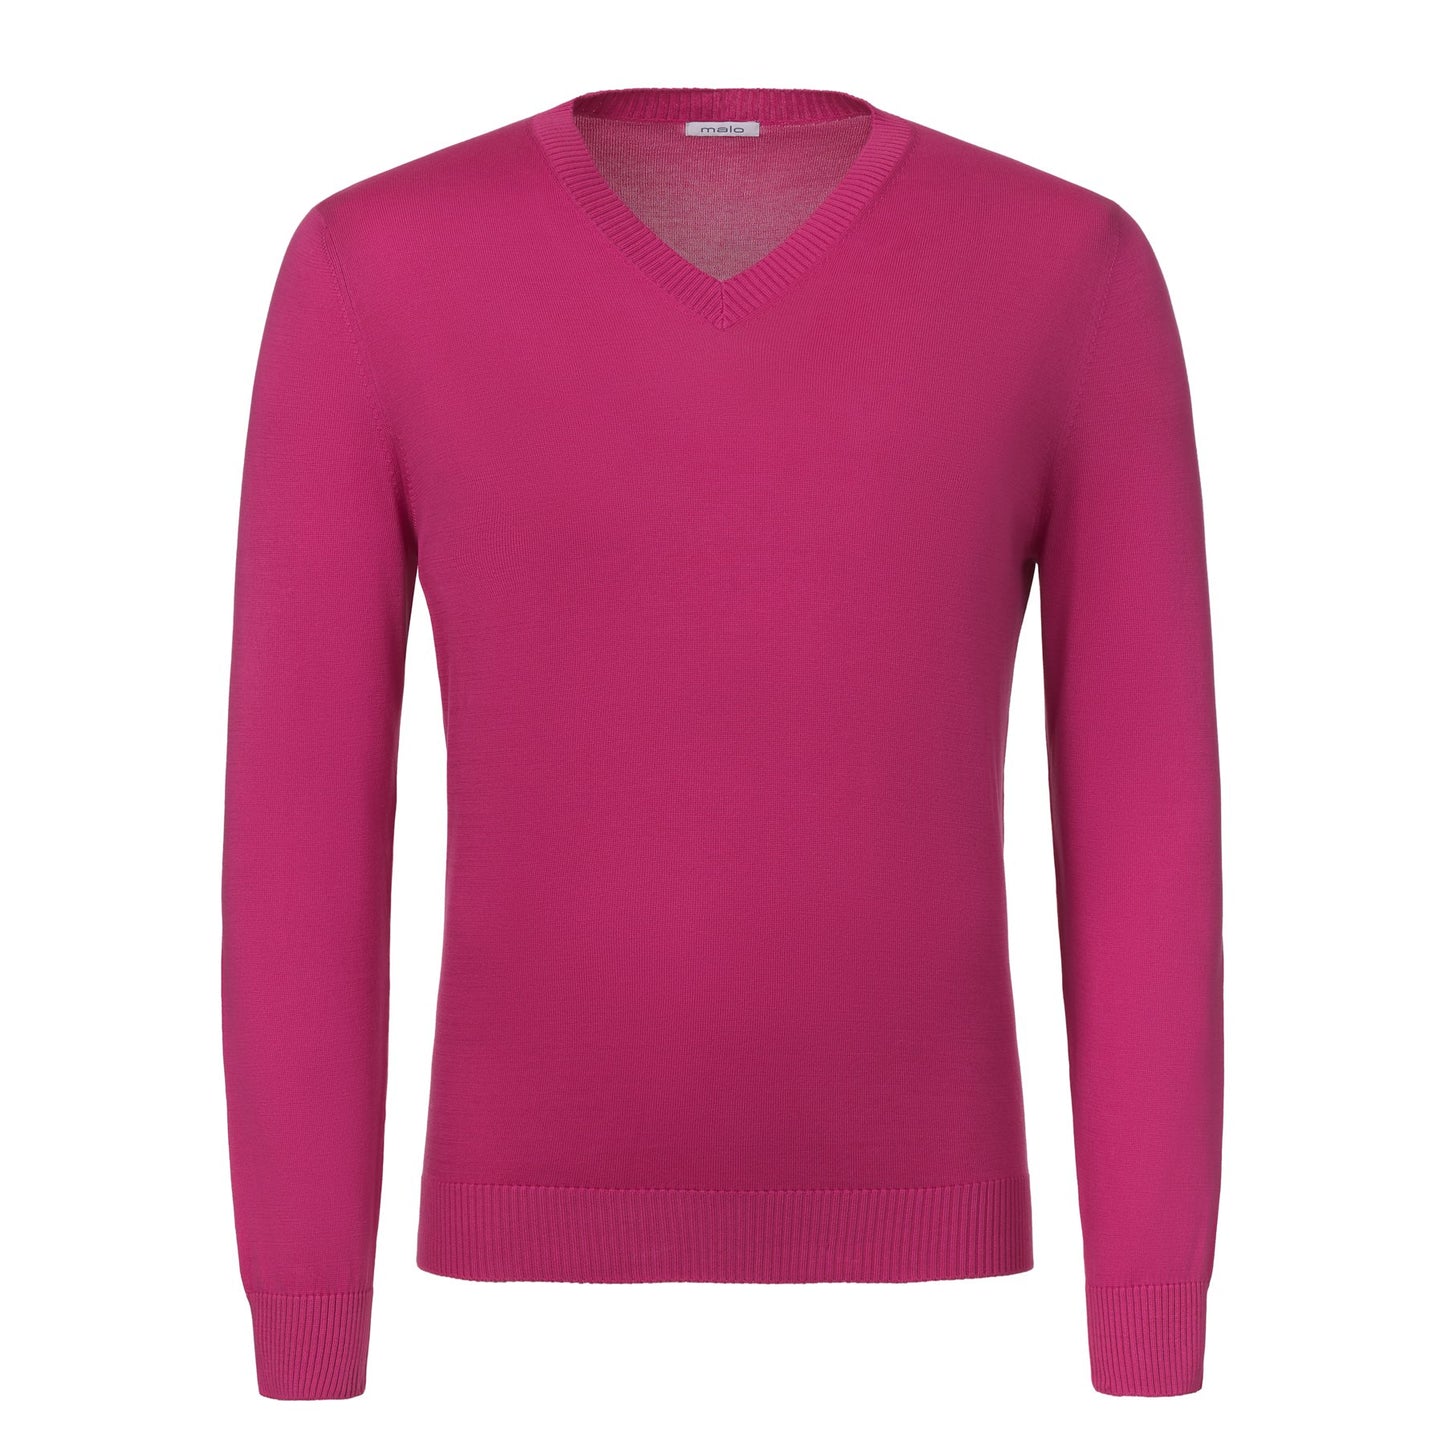 Malo Cotton Long Sleeve in Rose Pink - SARTALE